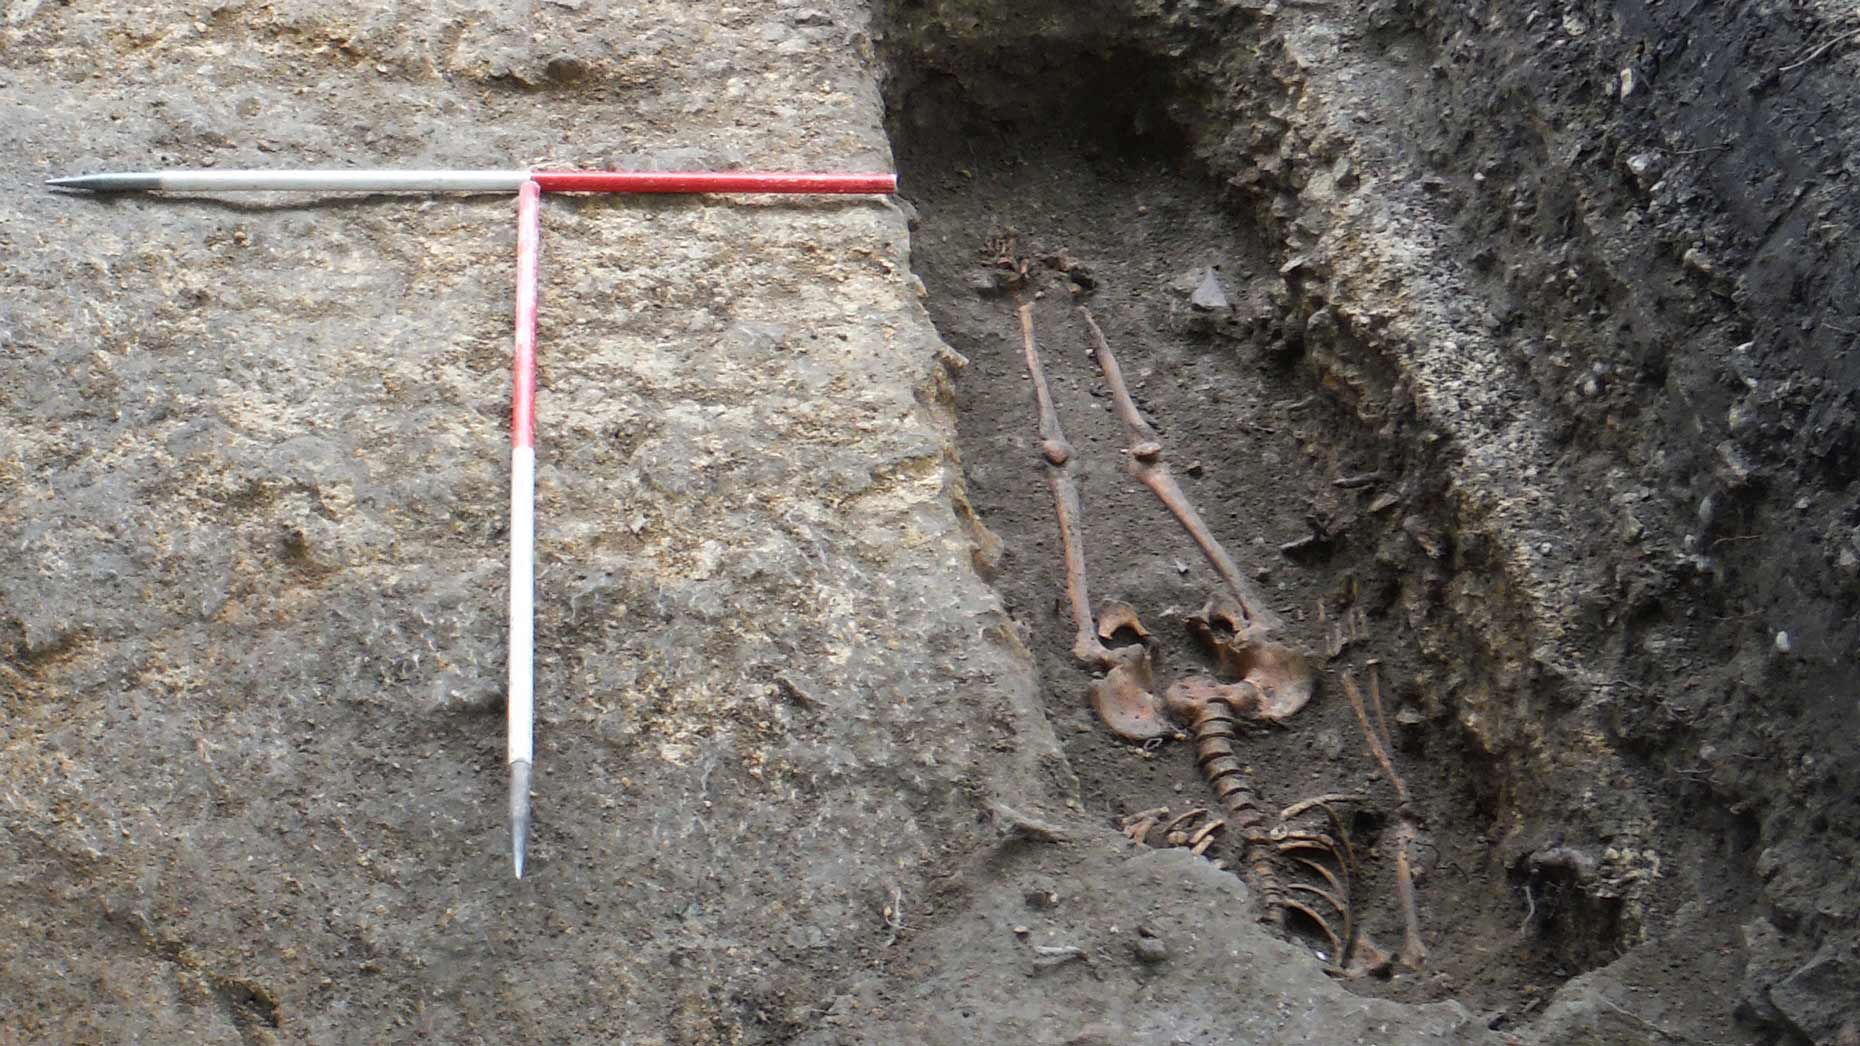 Two burials were discovered in the dig. So far, one has been identified as female. 